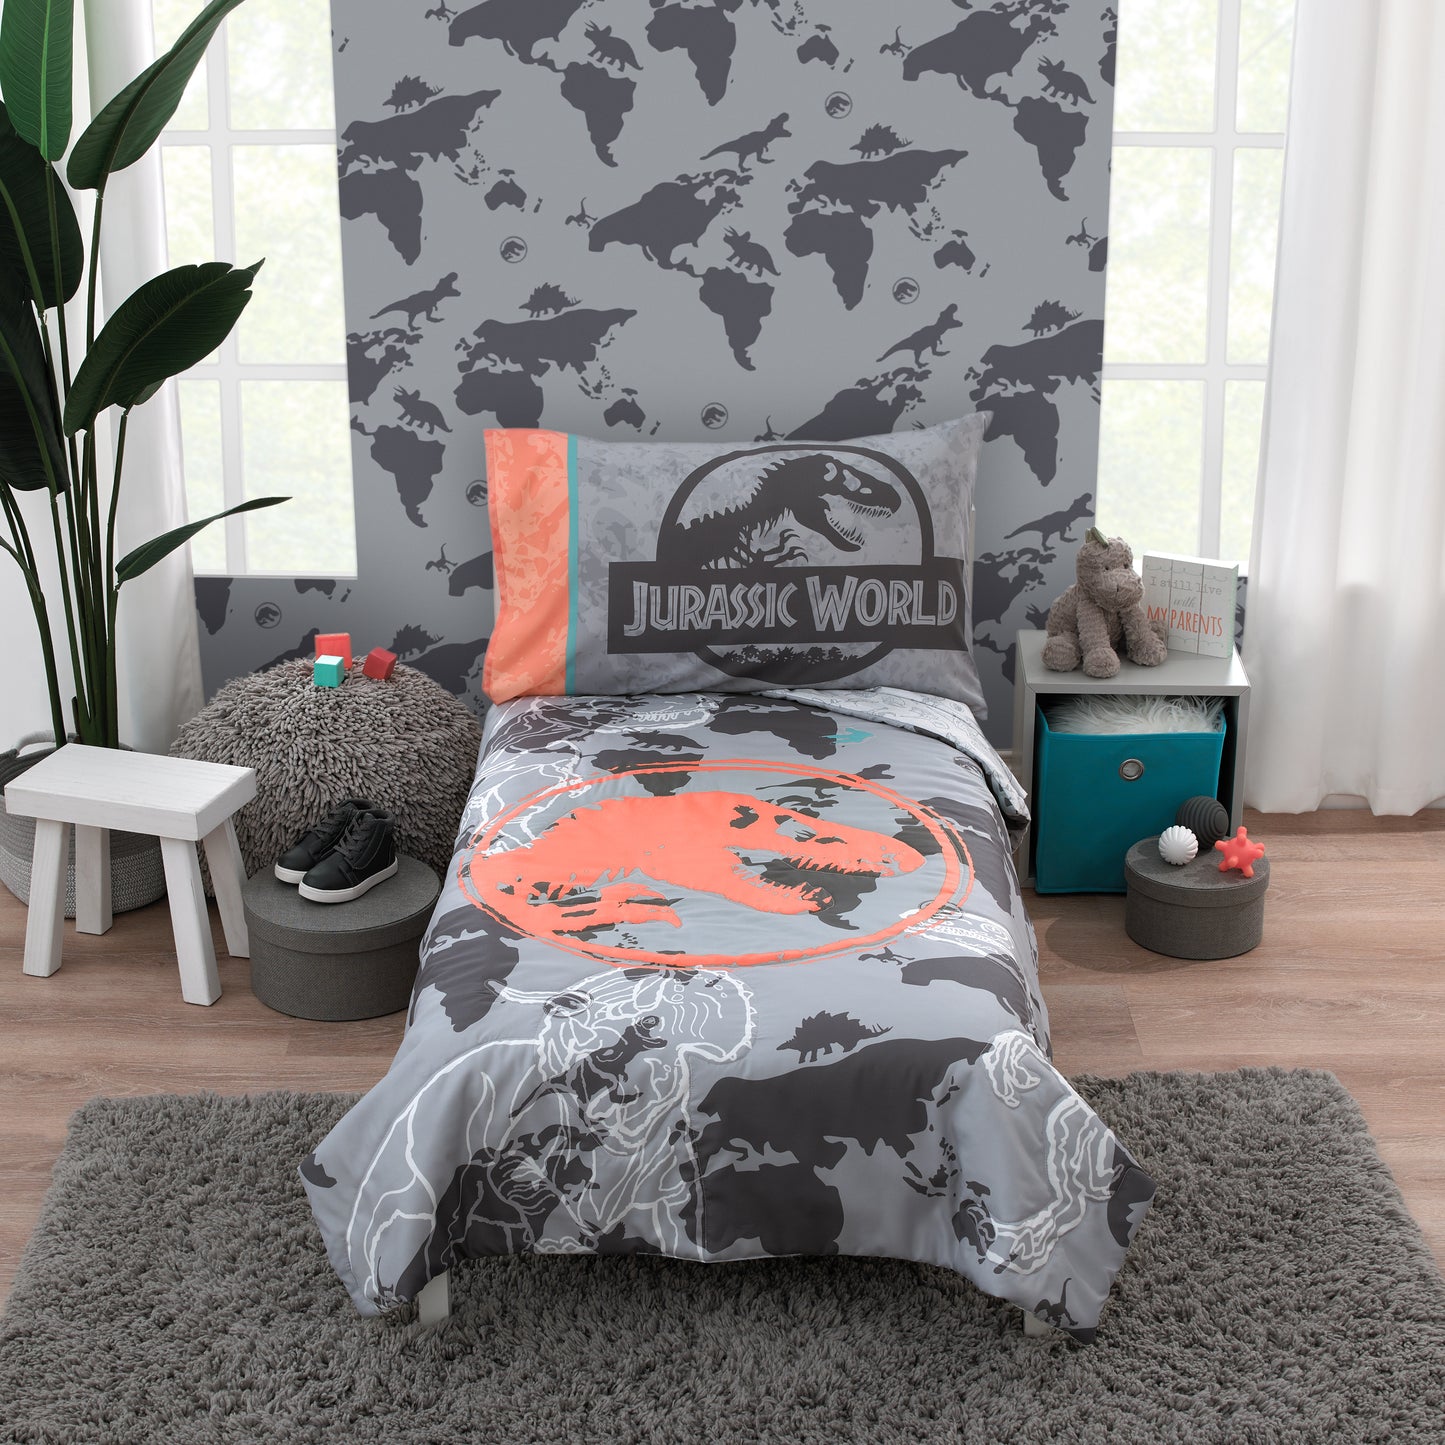 Universal Jurassic World Into The Wild Grey, White, Orange and Aqua T. Rex 4 Piece Toddler Bed Set - Comforter, Fitted Bottom Sheet, Flat Top Sheet and Reversible Pillowcase